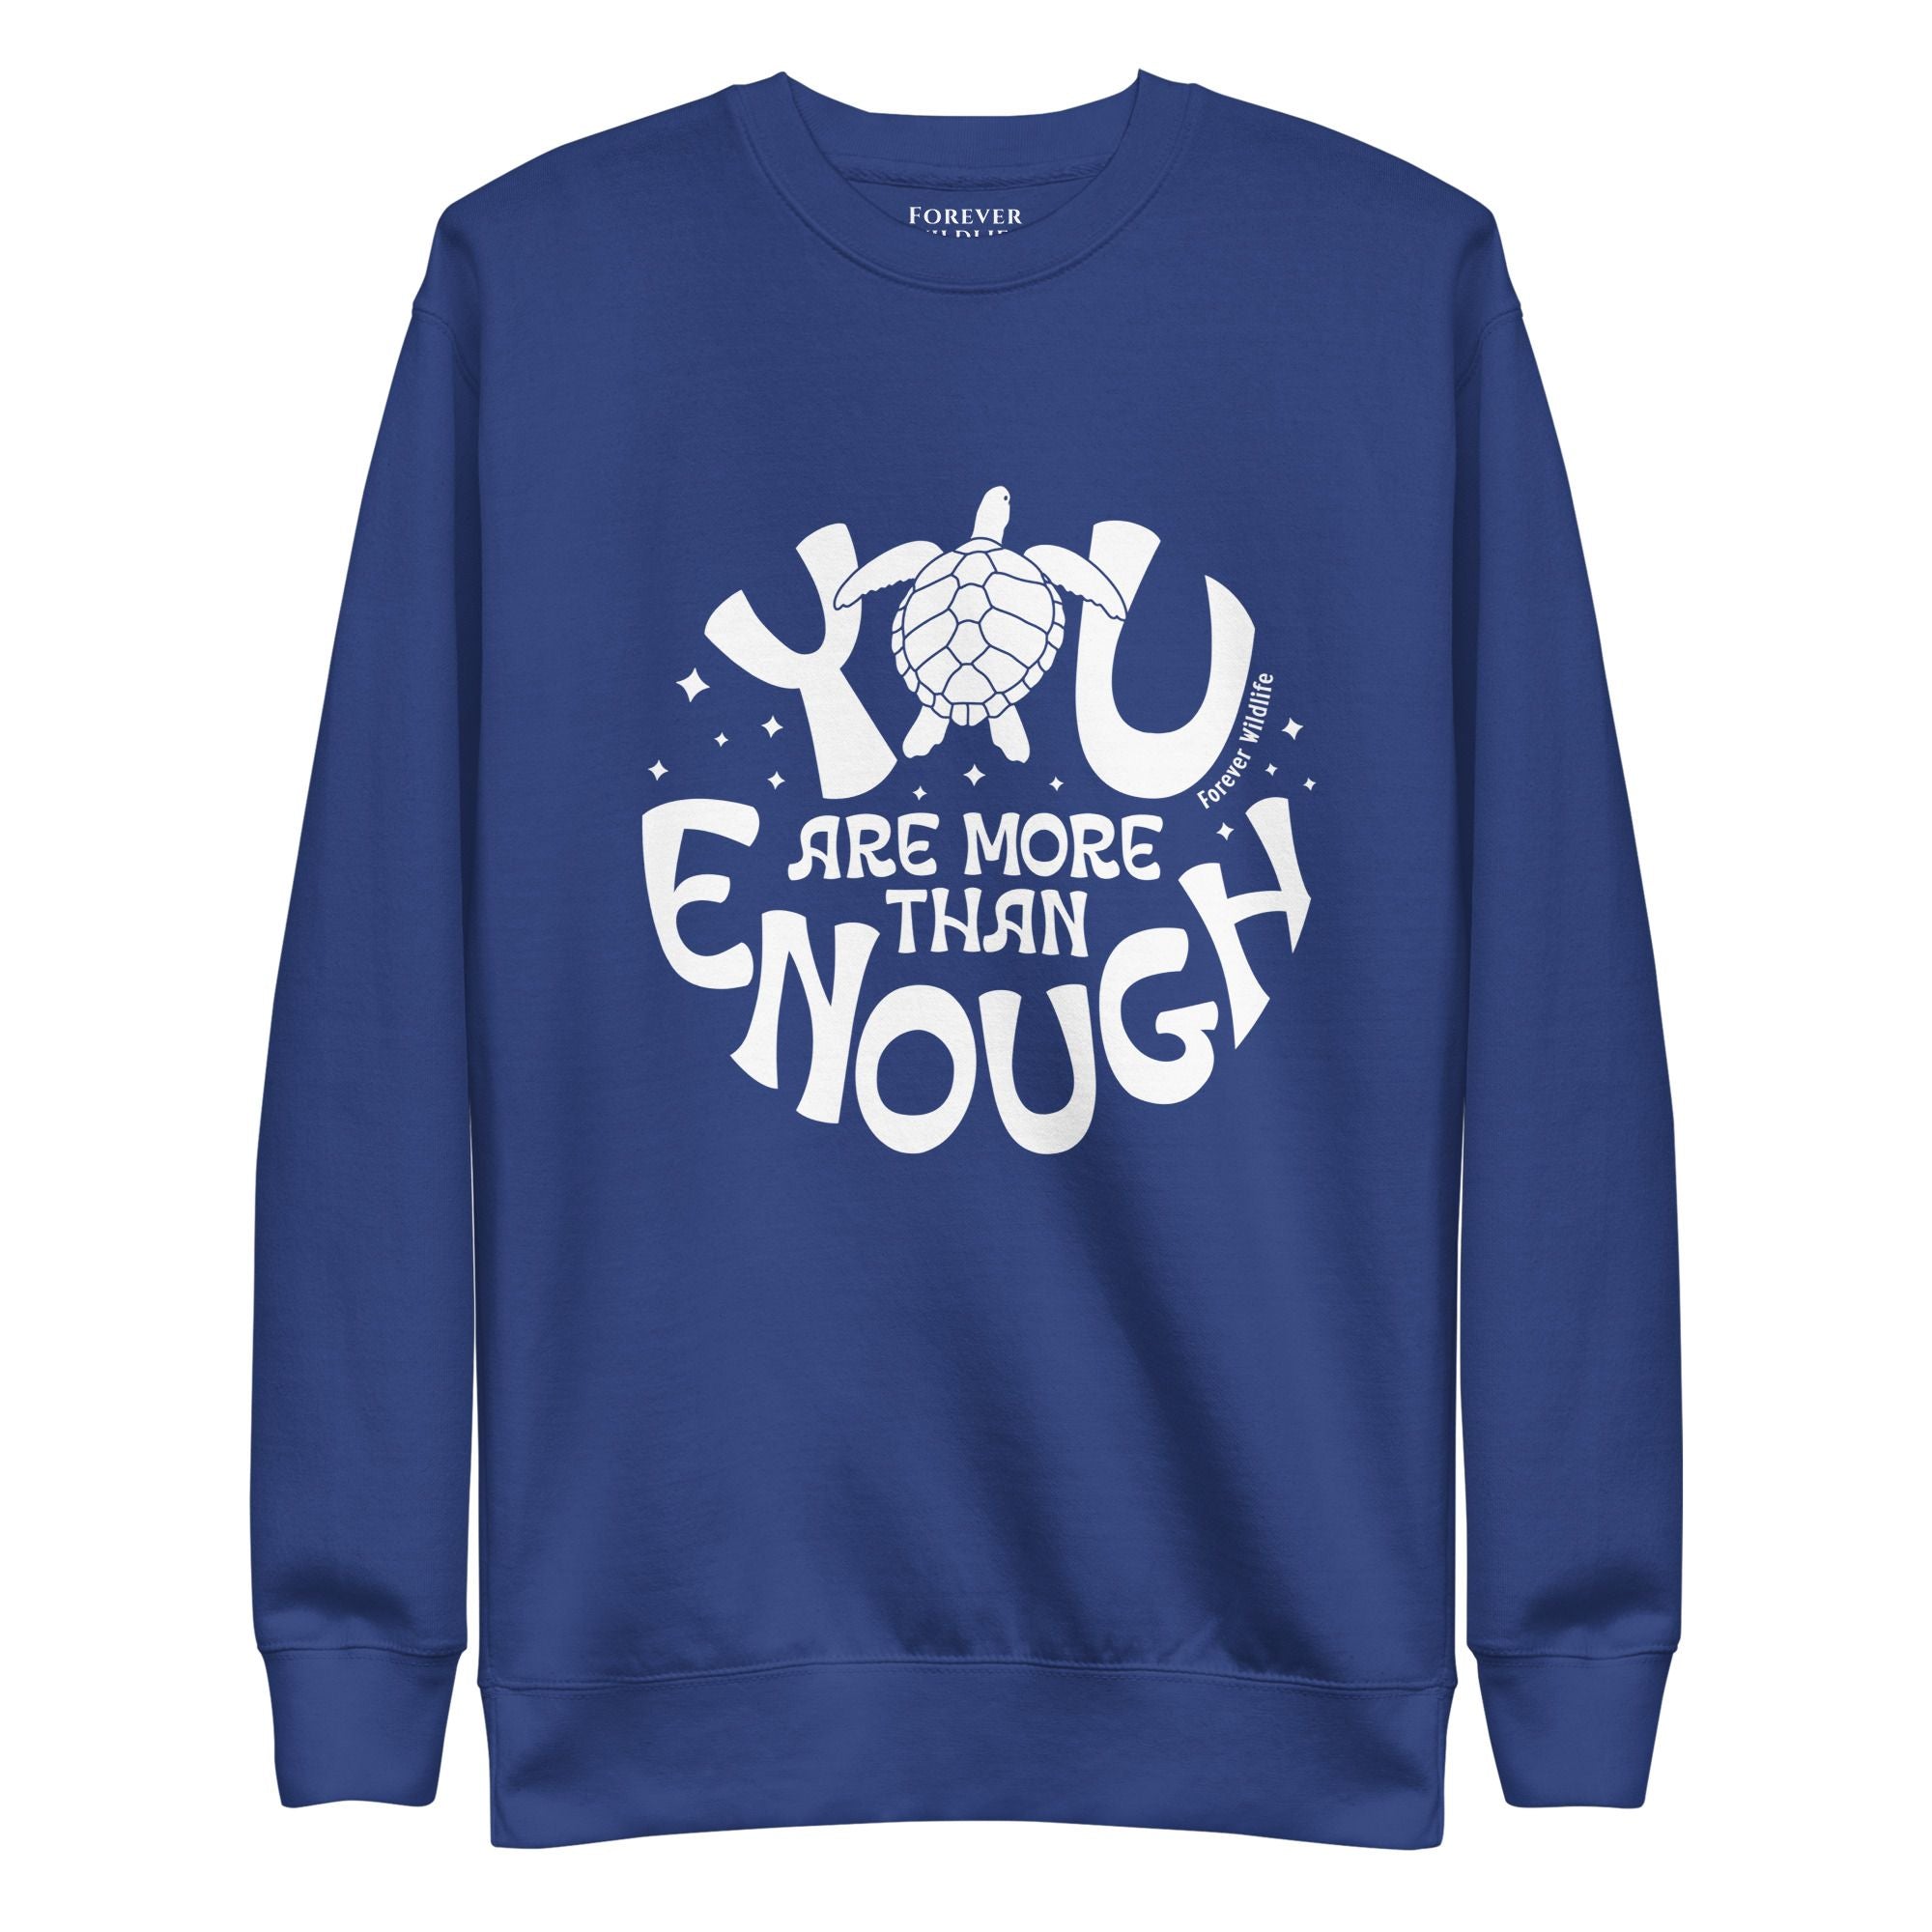 Sea Turtle Sweatshirt in Royal-Premium Wildlife Animal Inspiration Sweatshirt Design with 'You Are More Than Enough' text, part of Wildlife Sweatshirts & Clothing from Forever Wildlife.